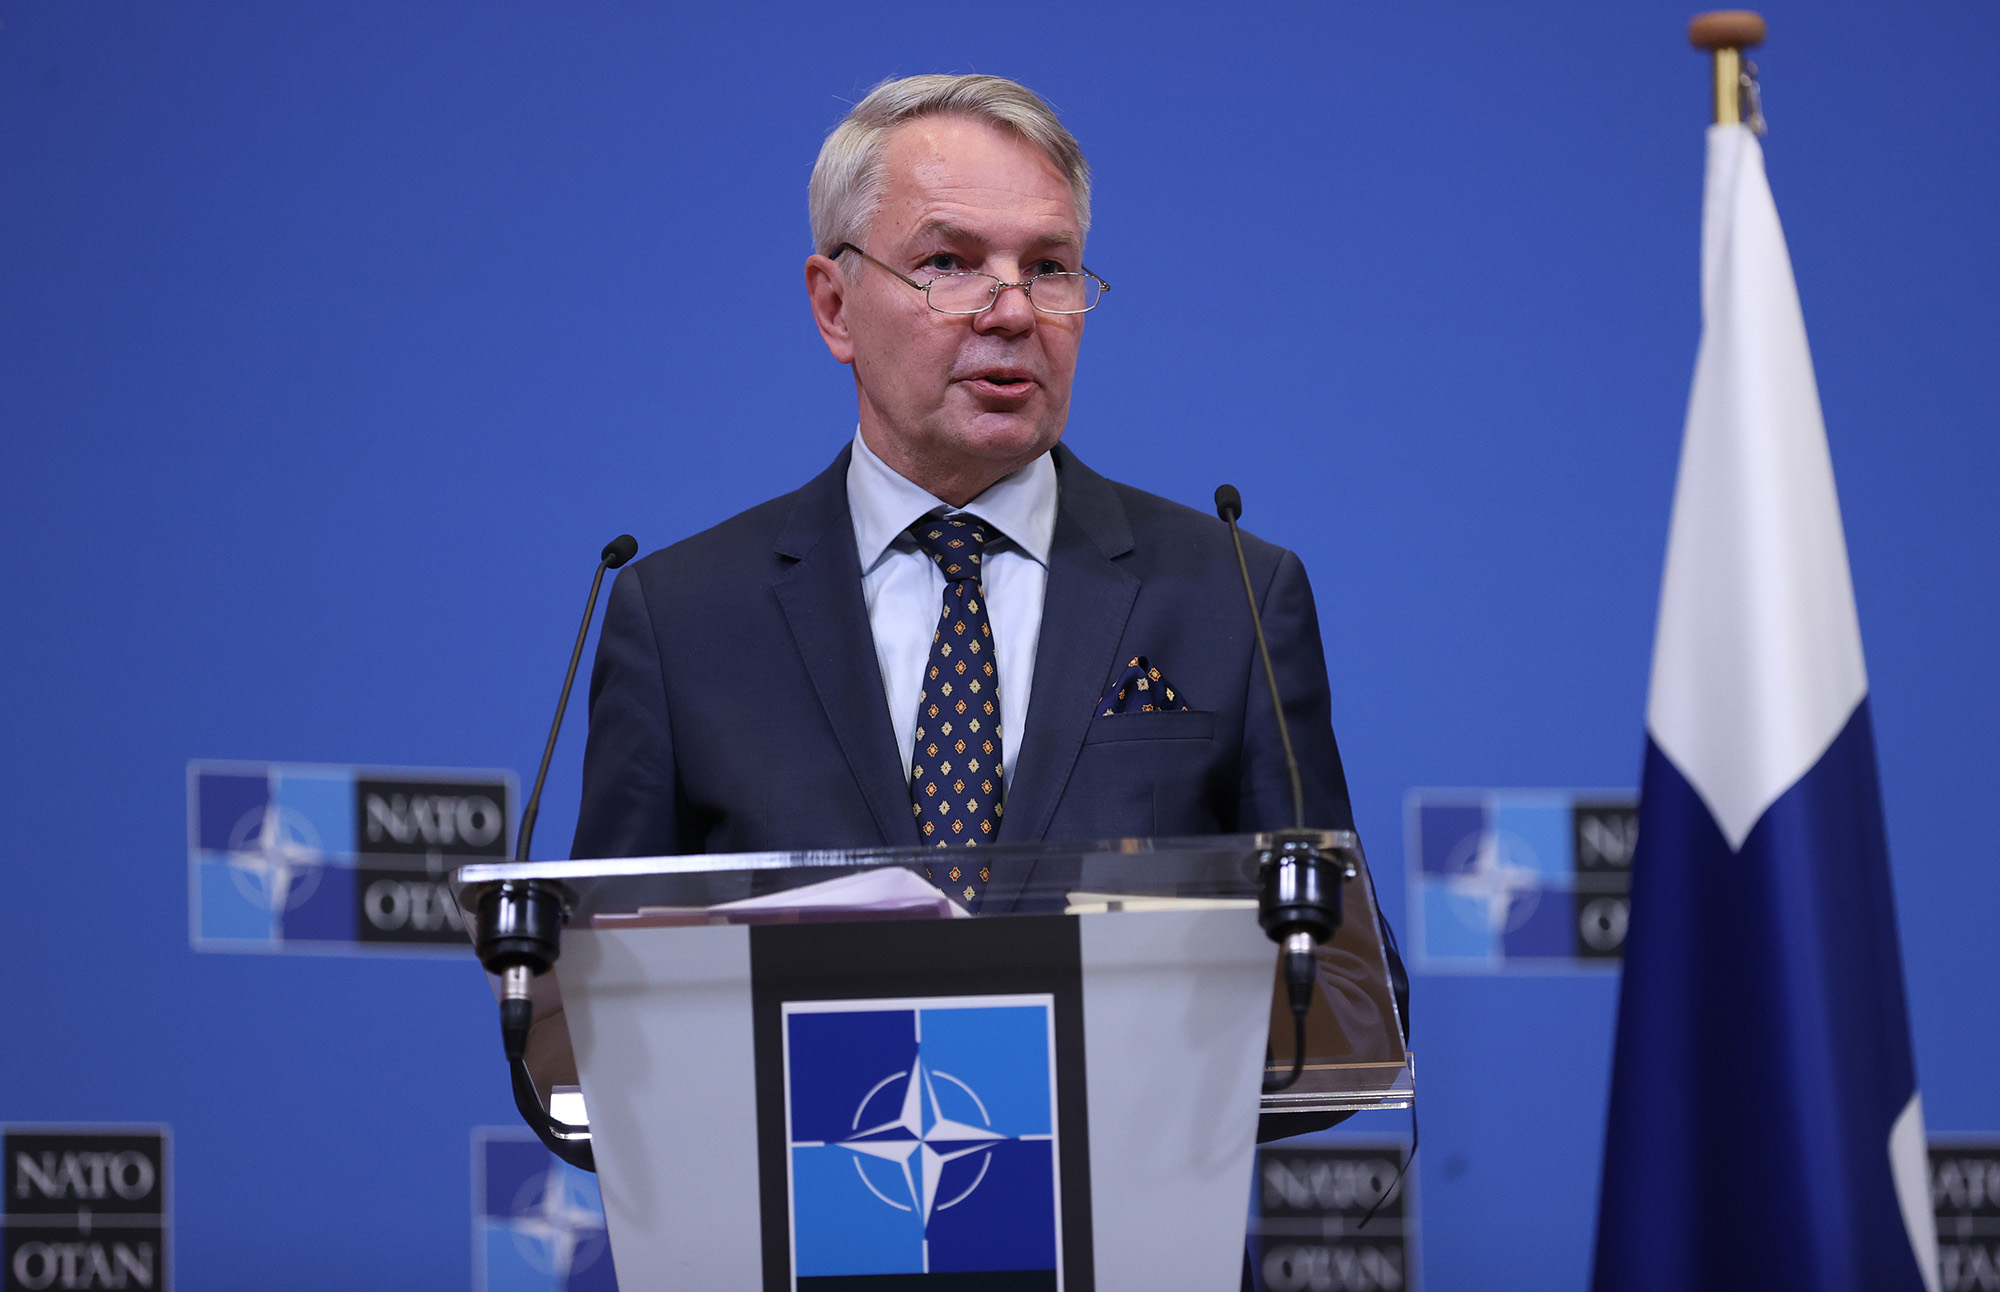 Finnish Foreign Minister Pekka Haavisto speaks at a press conference at NATO headquarters in Brussels, Belgium, on January 24.